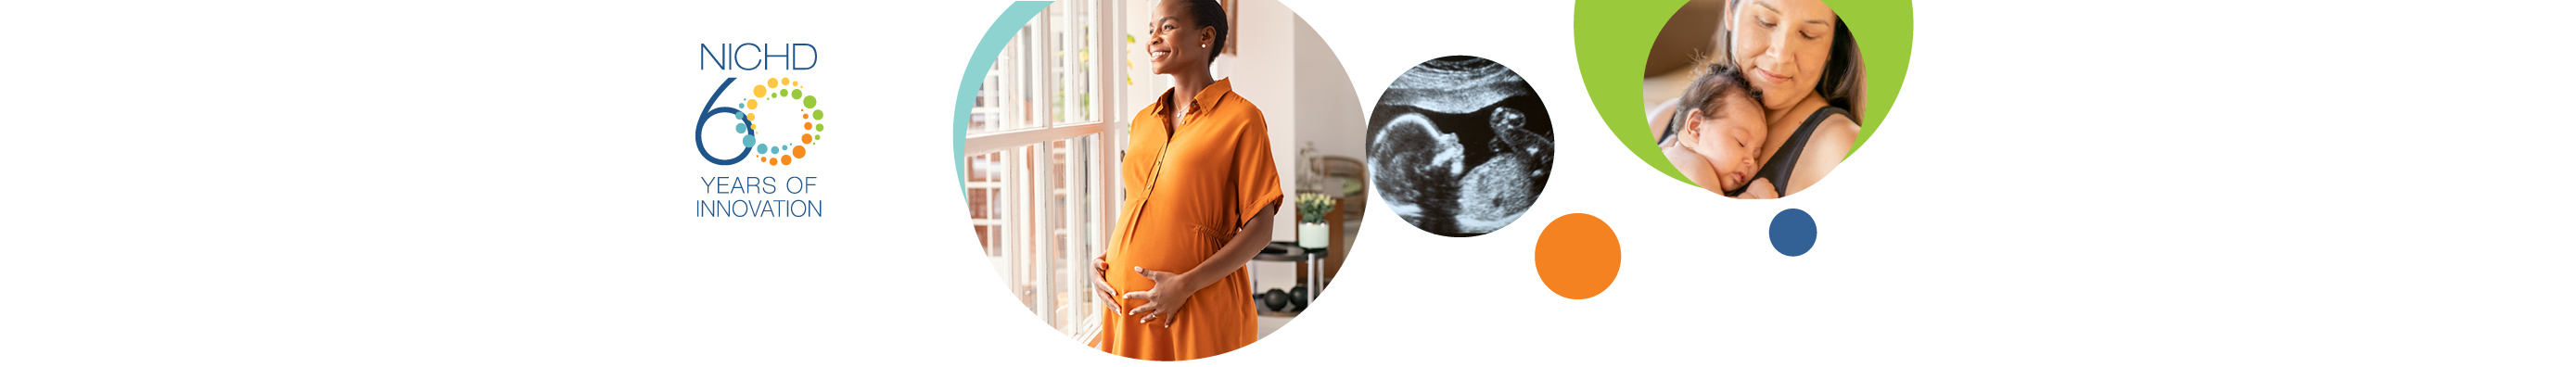 The NICHD 60th Anniversary logo (far left) alongside a series of three images related to maternal health, including a smiling pregnant woman holding her belly (left), an ultrasound image (middle), and a woman holding a baby against her chest (right).